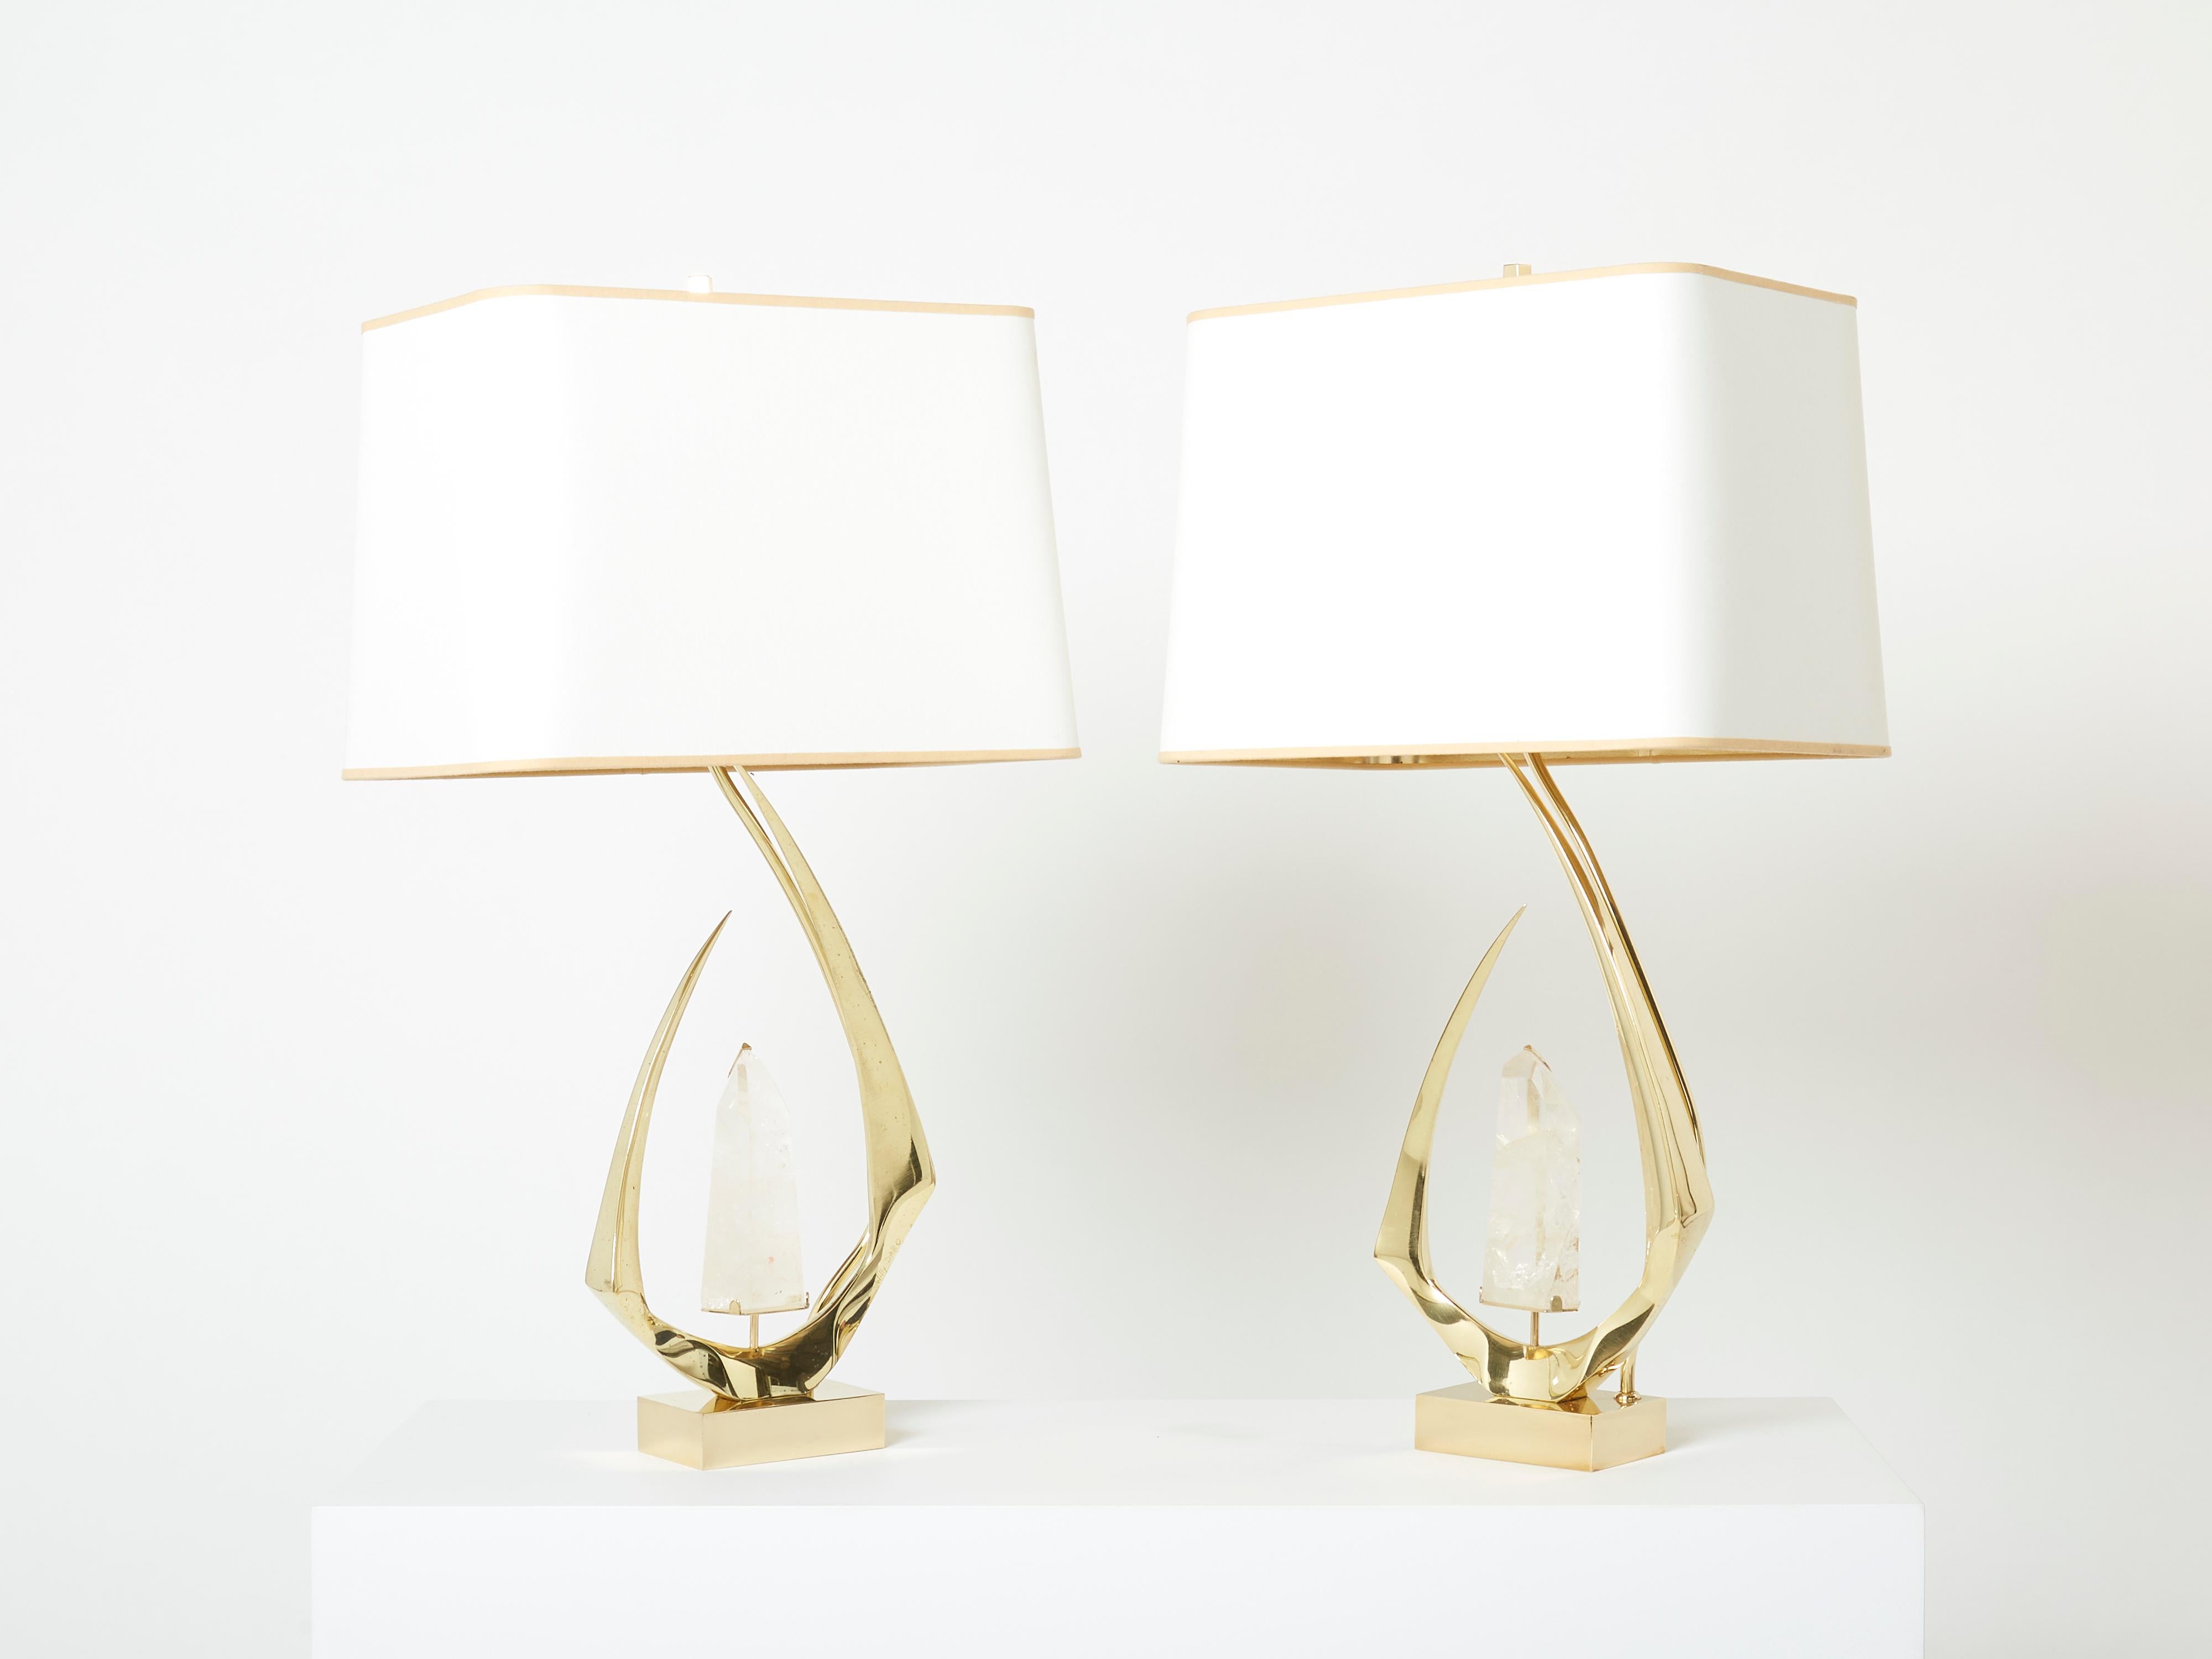 This pair of vintage table lamps has the intricacy of fine jewelry. Brass is sculpted and curved to look miraculously molten and gravity-dying, forming part of the base. Each lamp features a translucent crystal rock inclusion perfectly cut. The